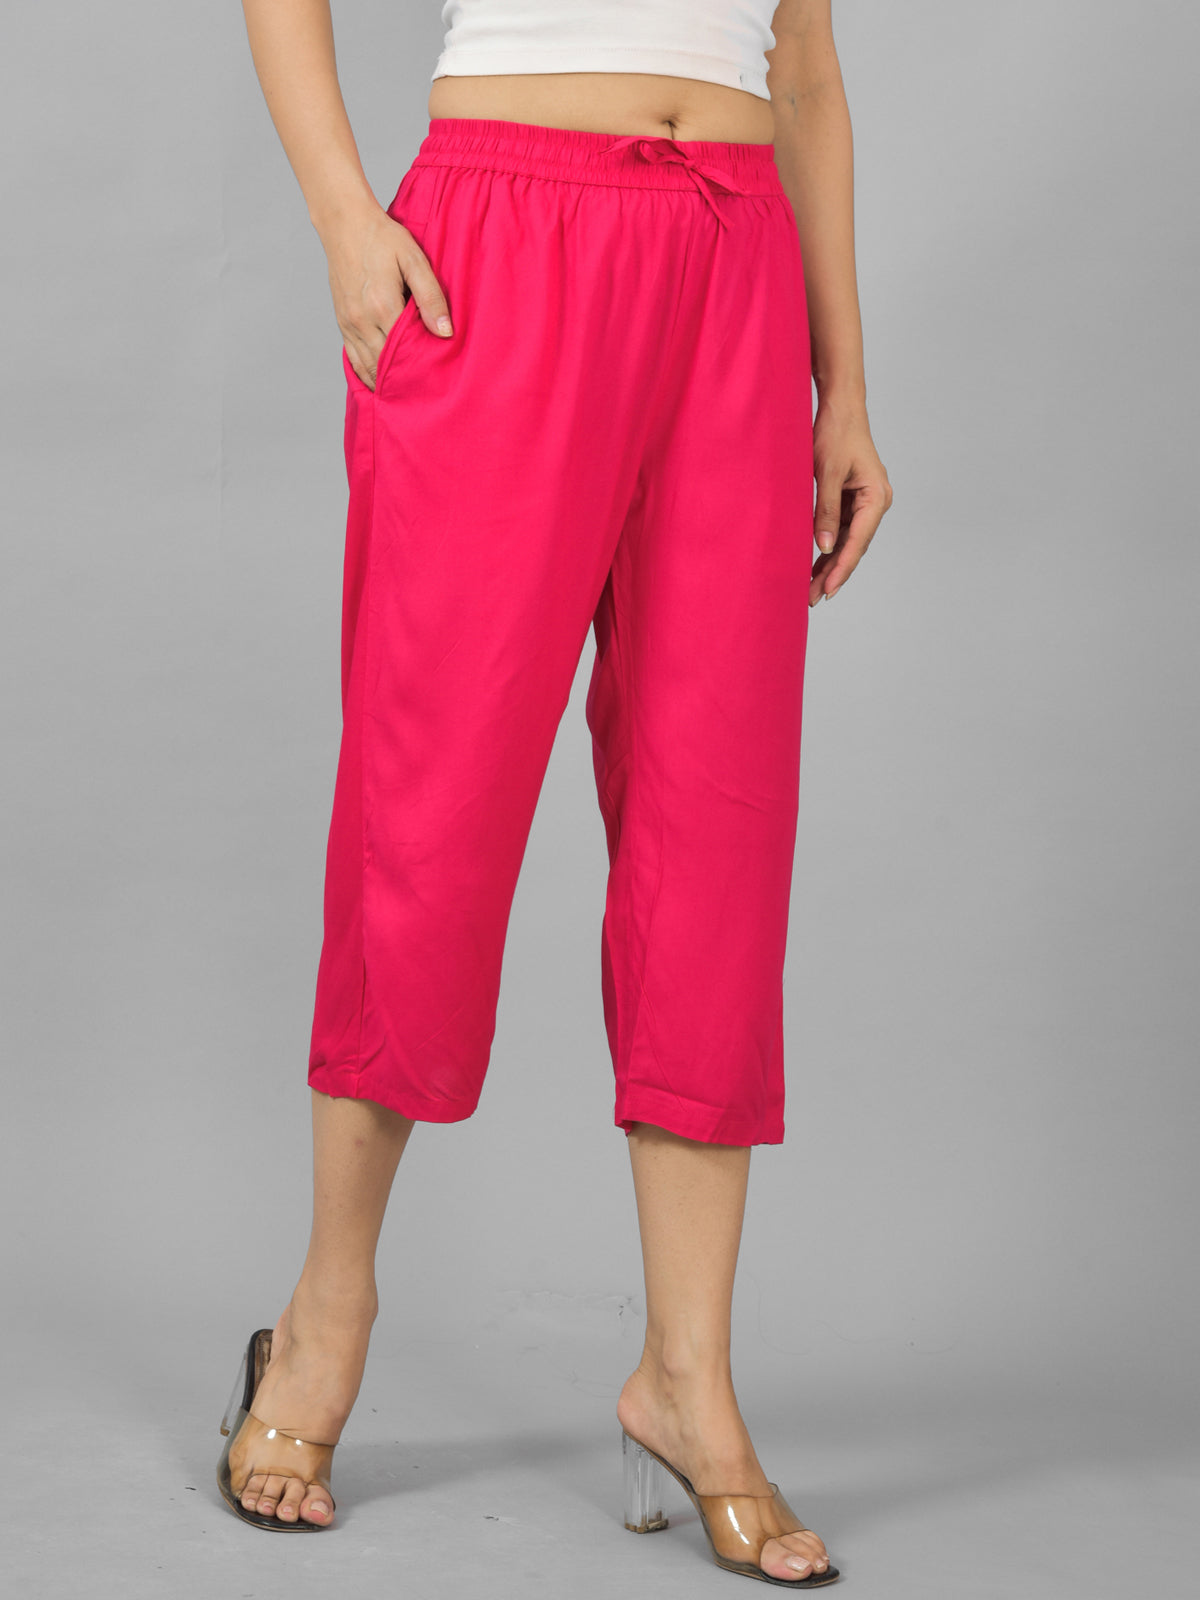 Women Solid Rani Pink Rayon Calf Length Culottes Trouser